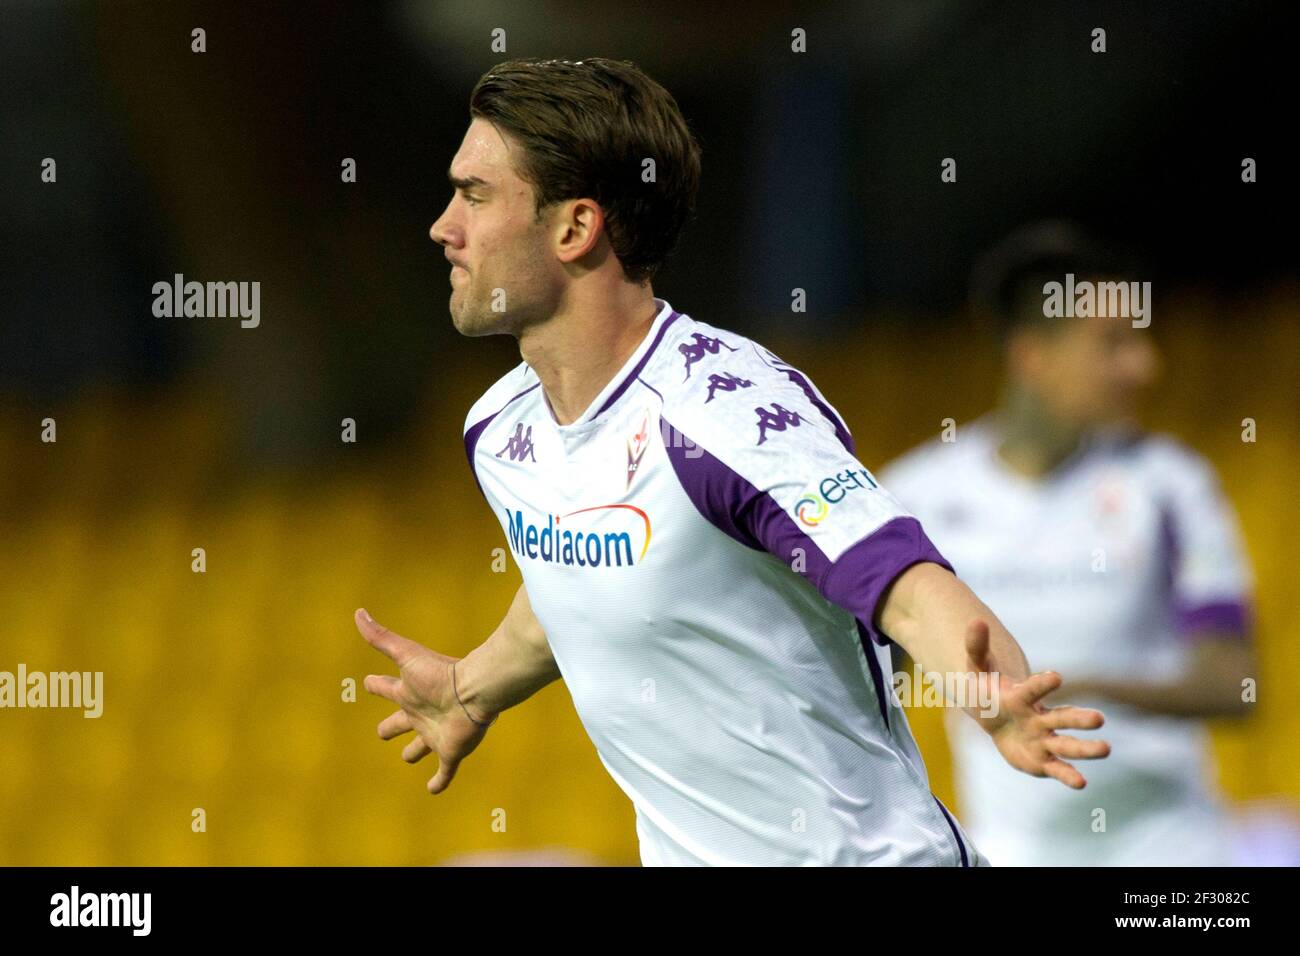 Dusan Vlahovic of ACF Fiorentina smiles during the pre-season News Photo  - Getty Images